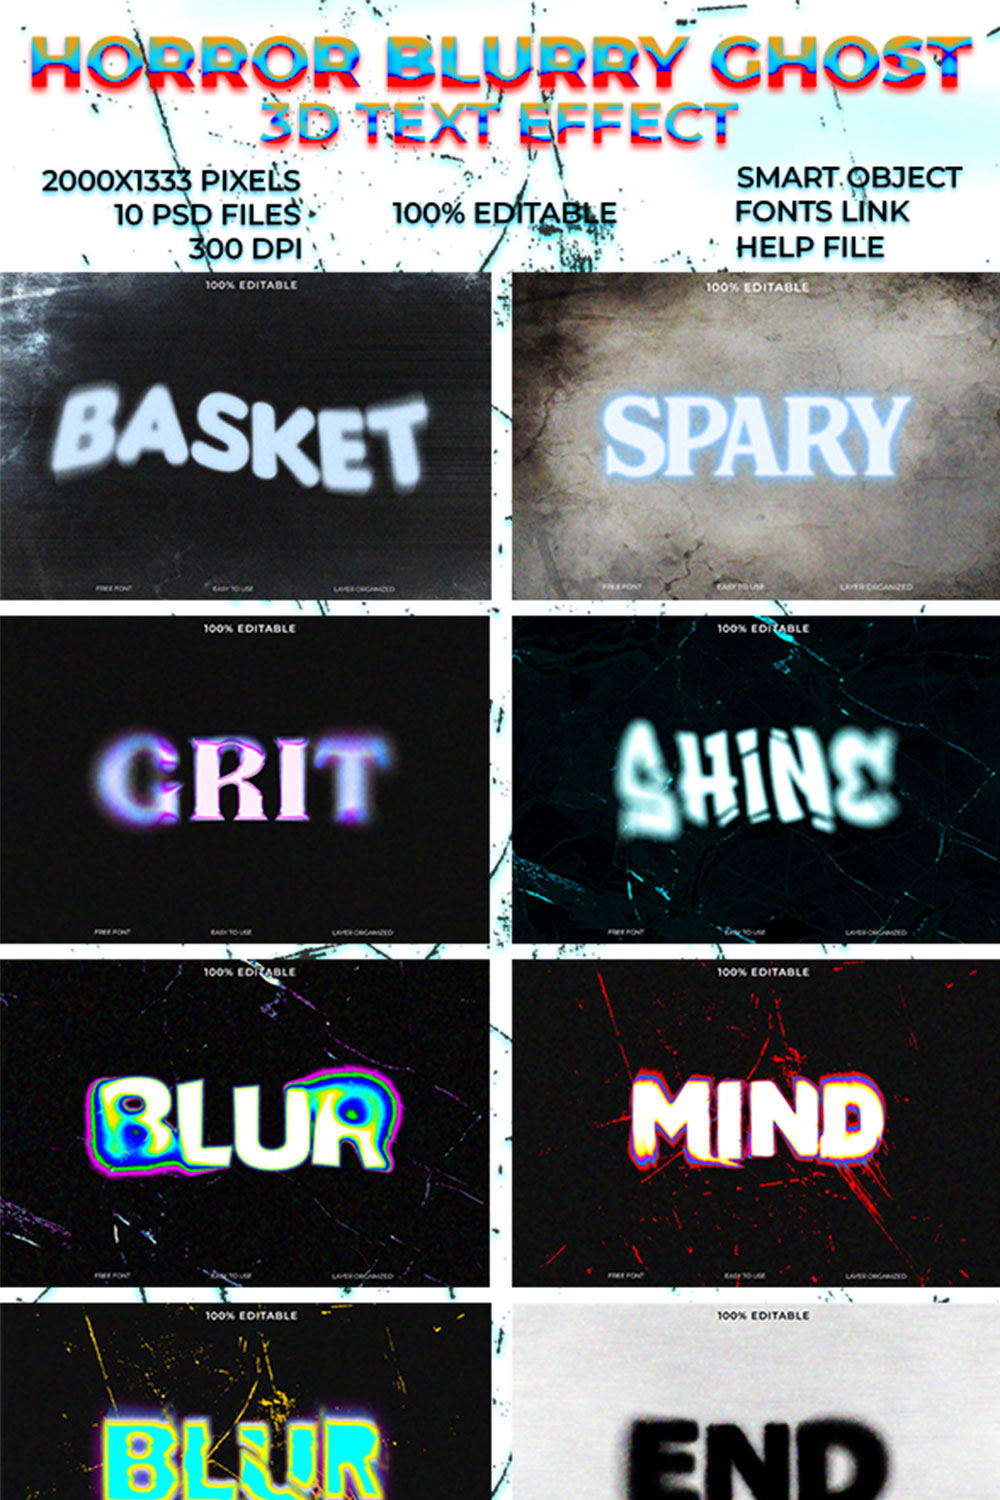 Horror Blurry Ghost Text Effects pinterest preview image.